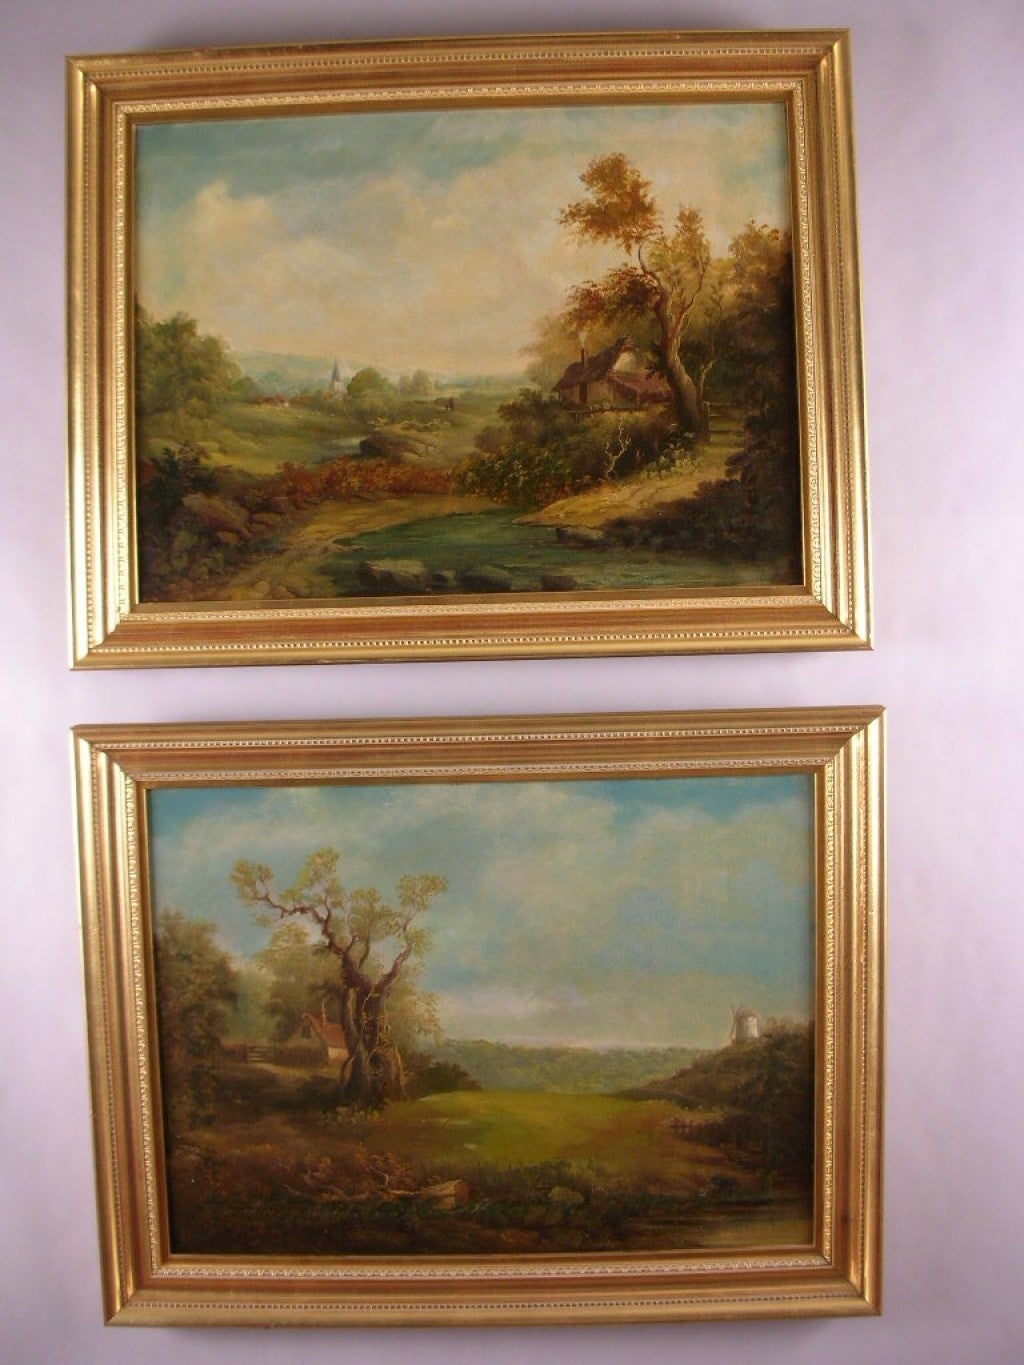 Rare pair of landscape paintings, signed C. Baker, each in a modern giltwood frame.